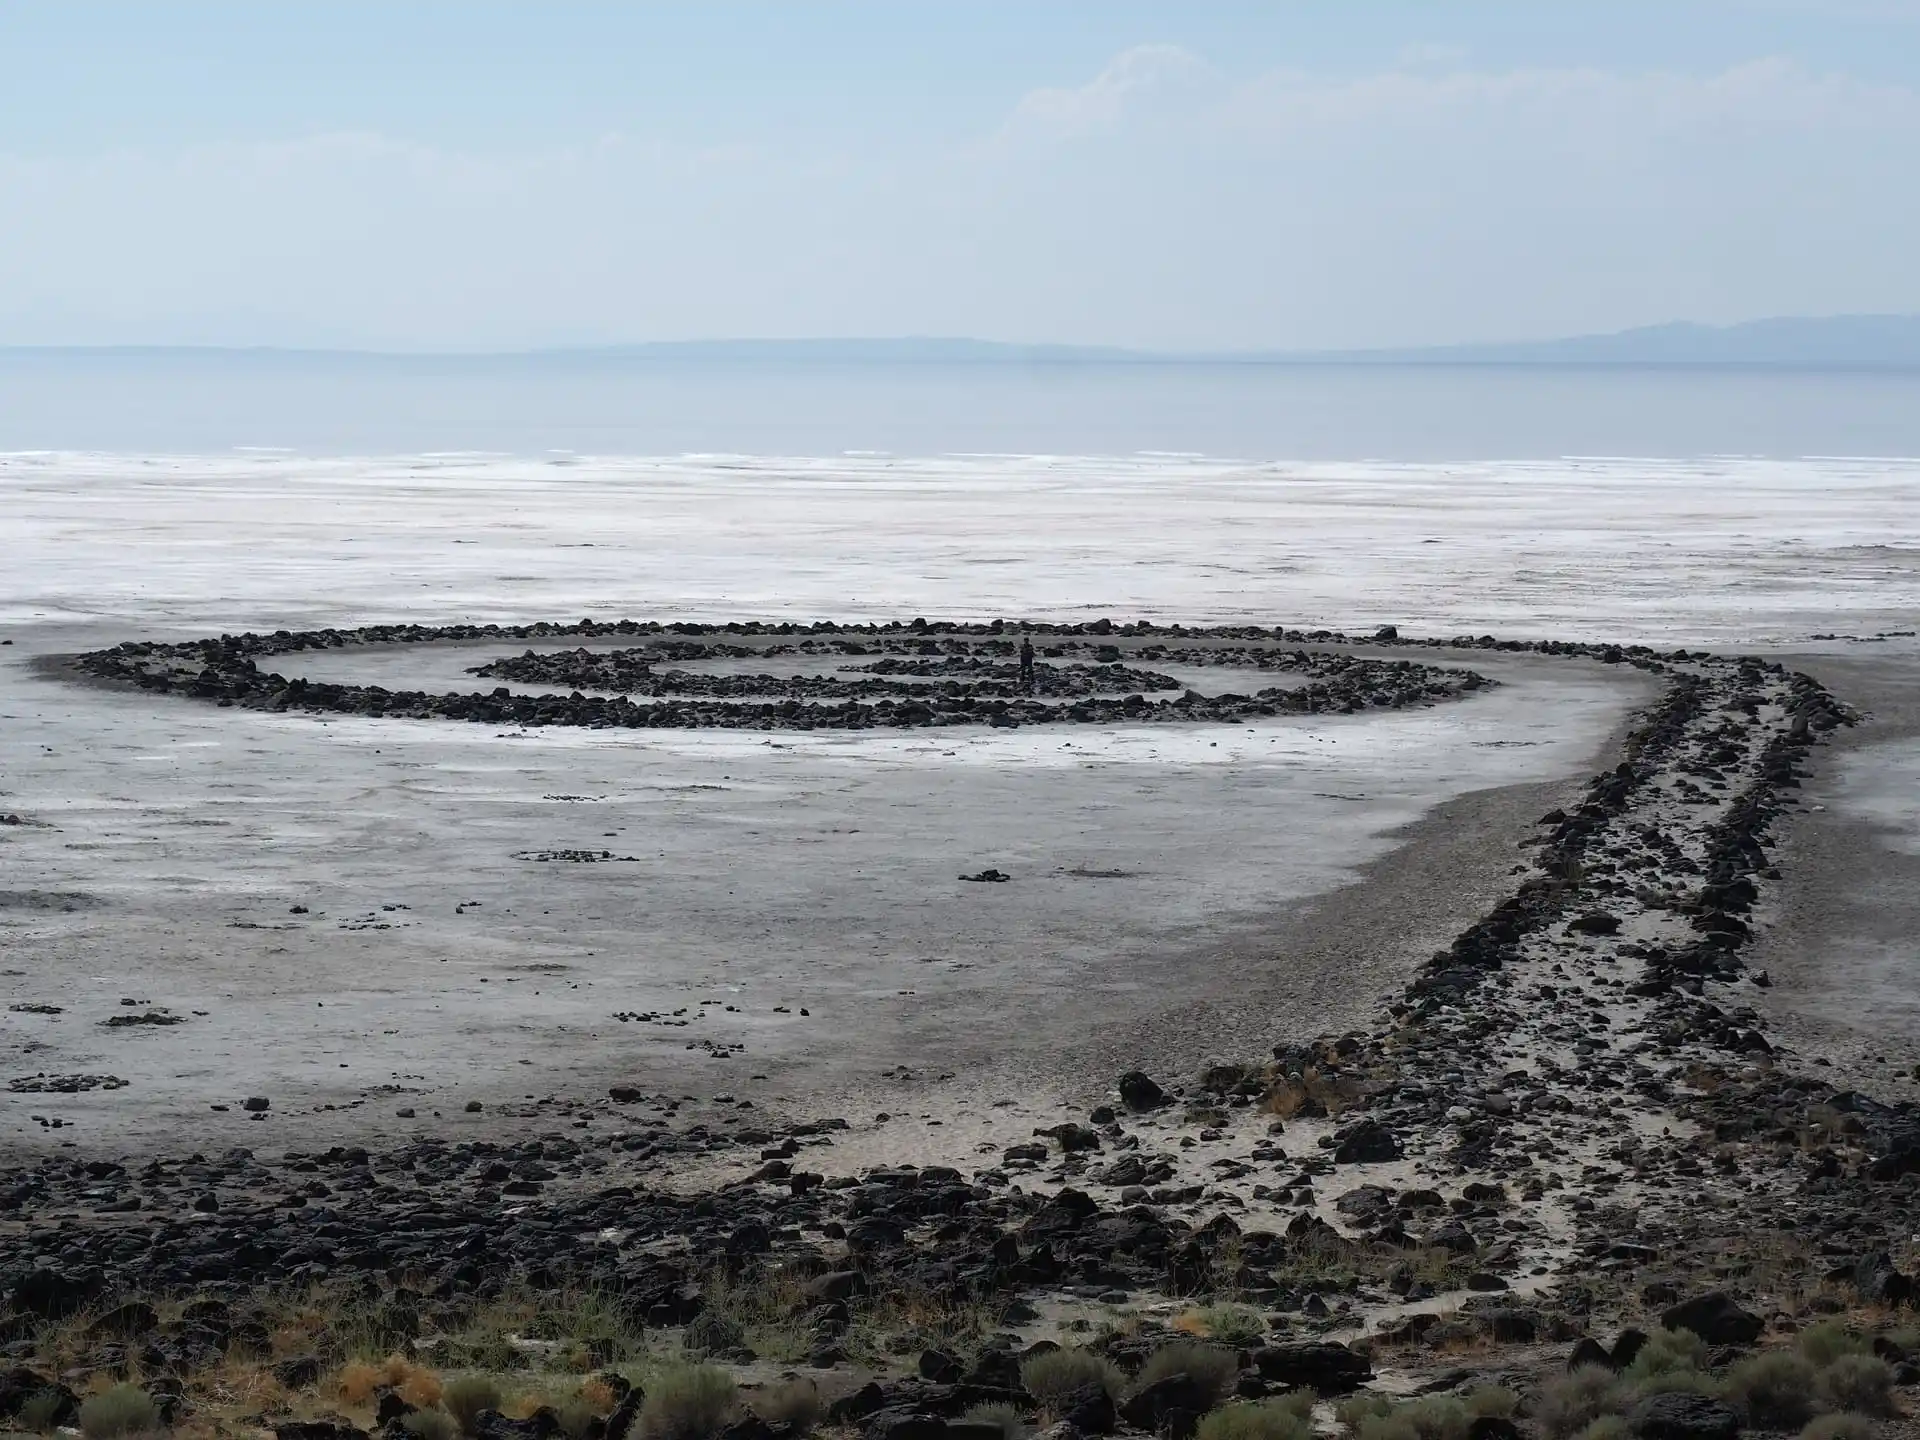 The Spiral Jetty on the Great Salt Lake